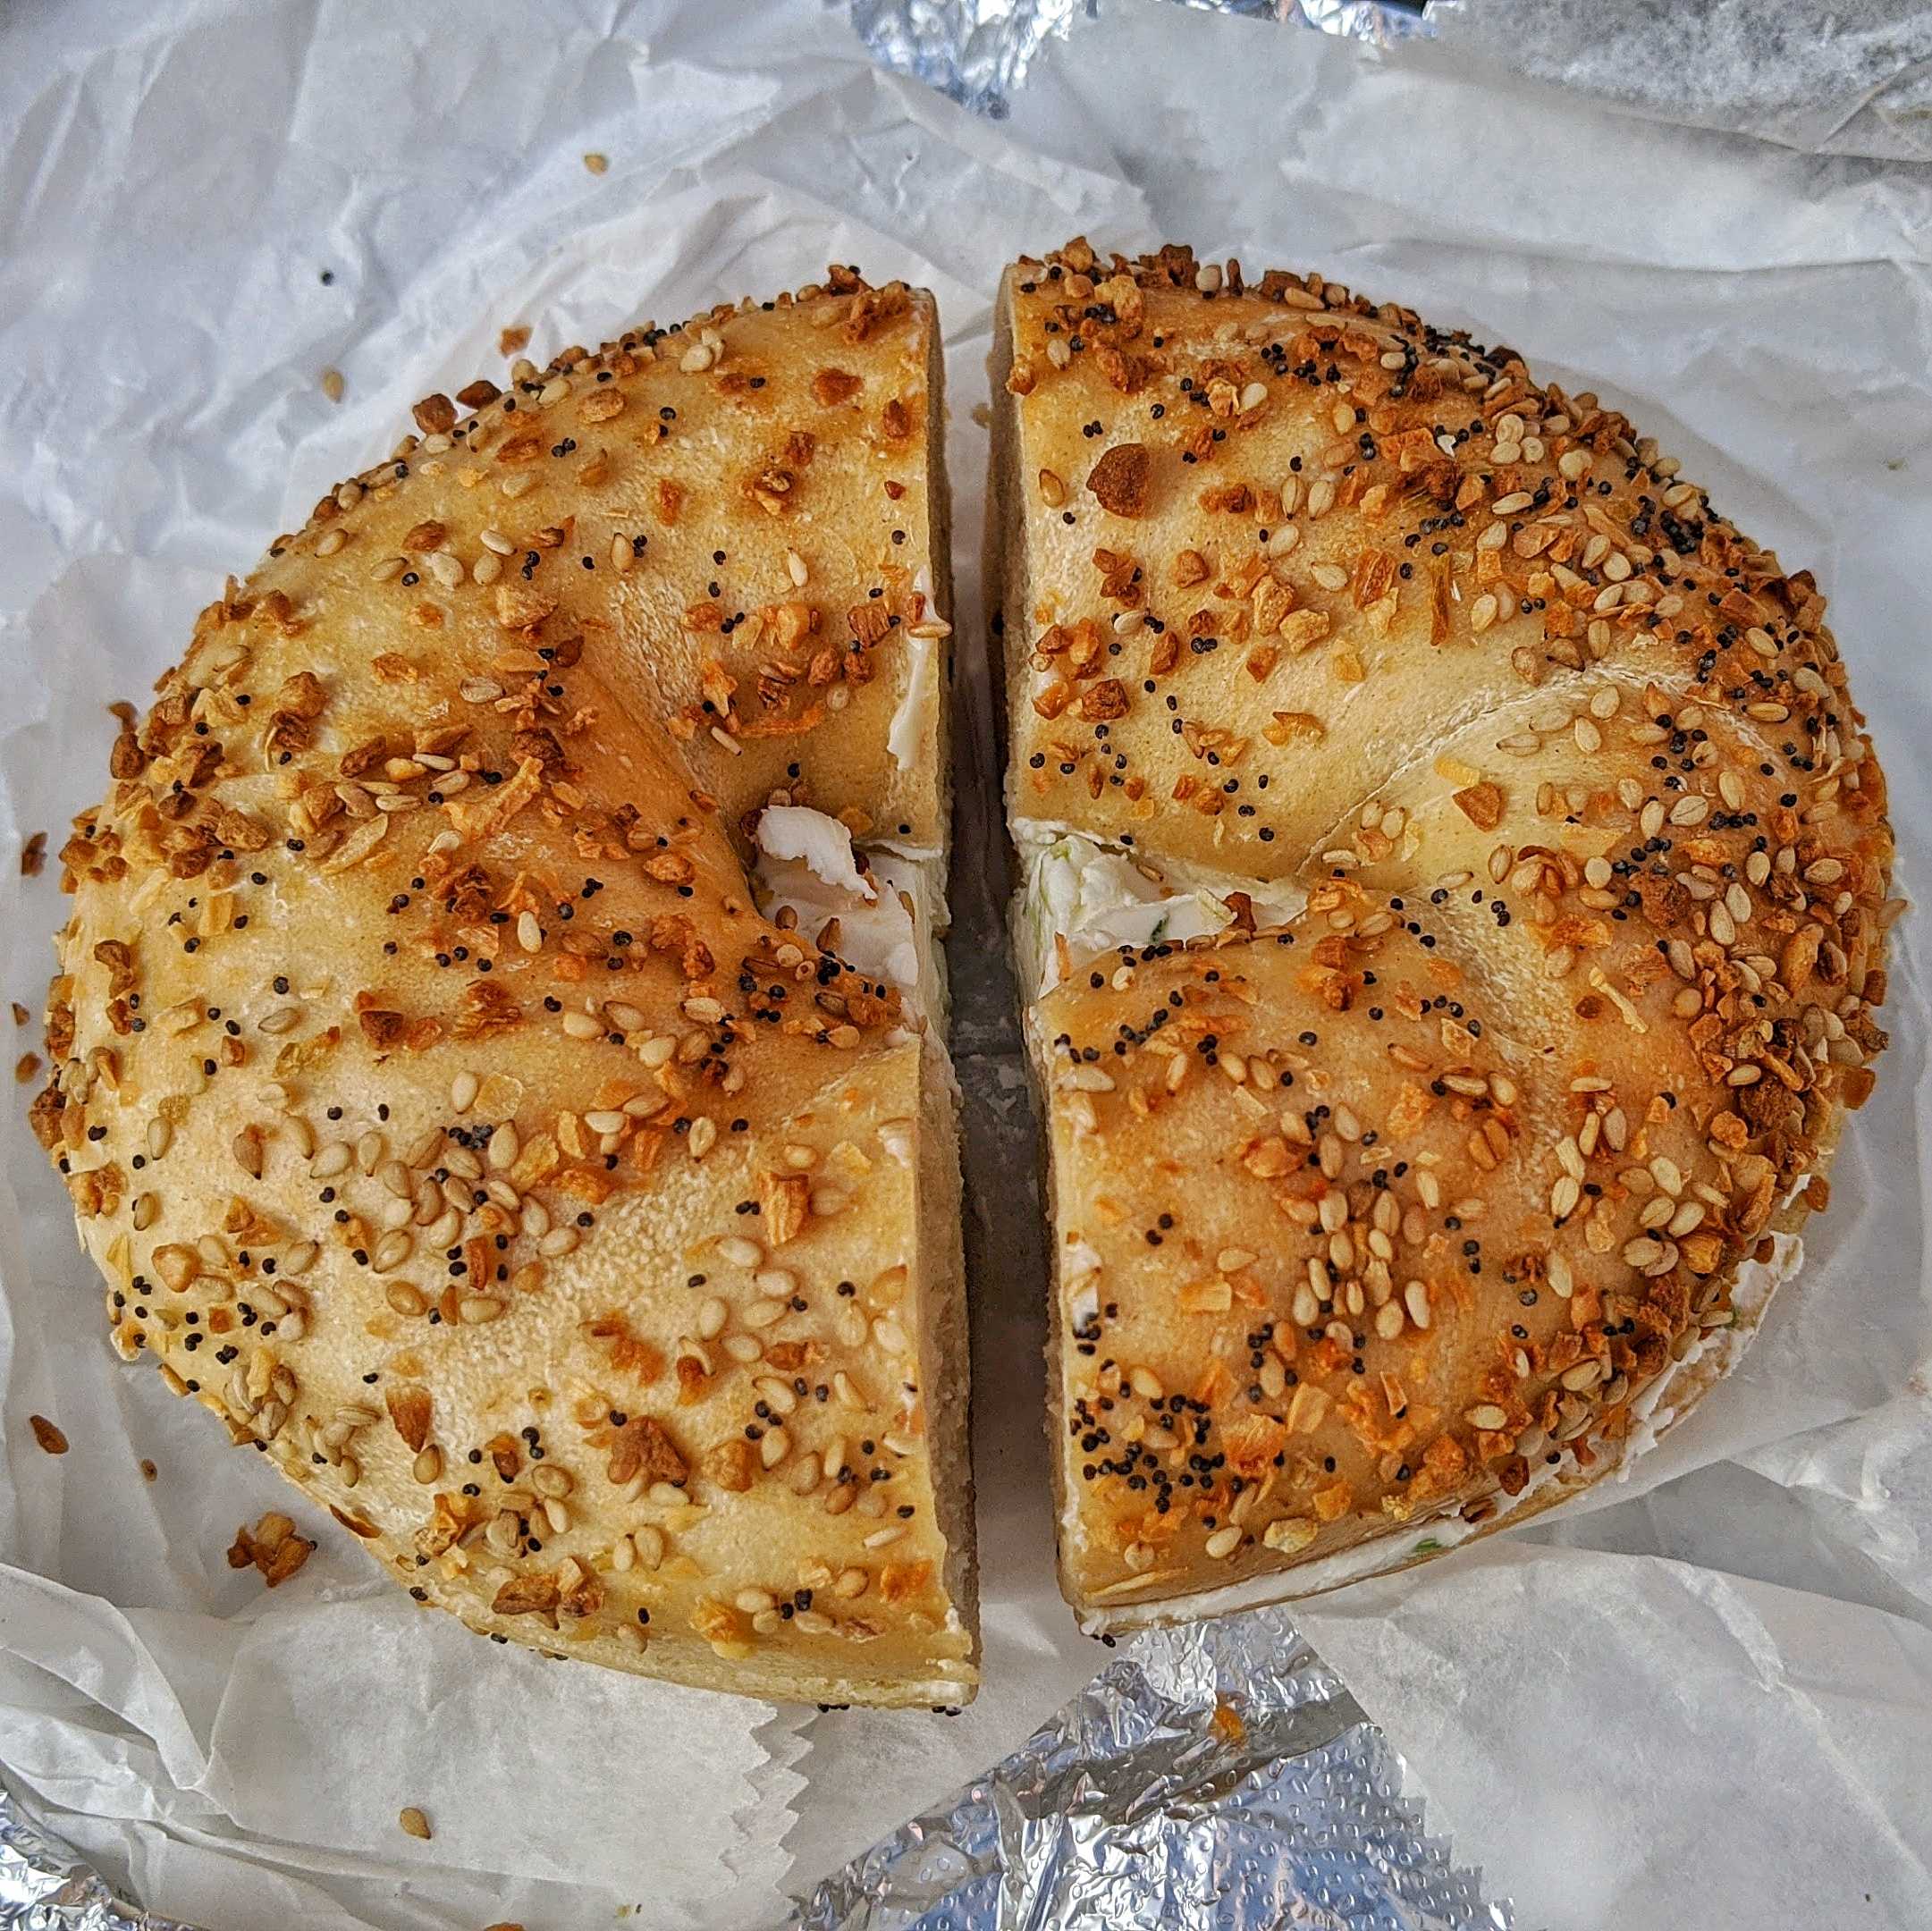 Manor Superette and Bagels